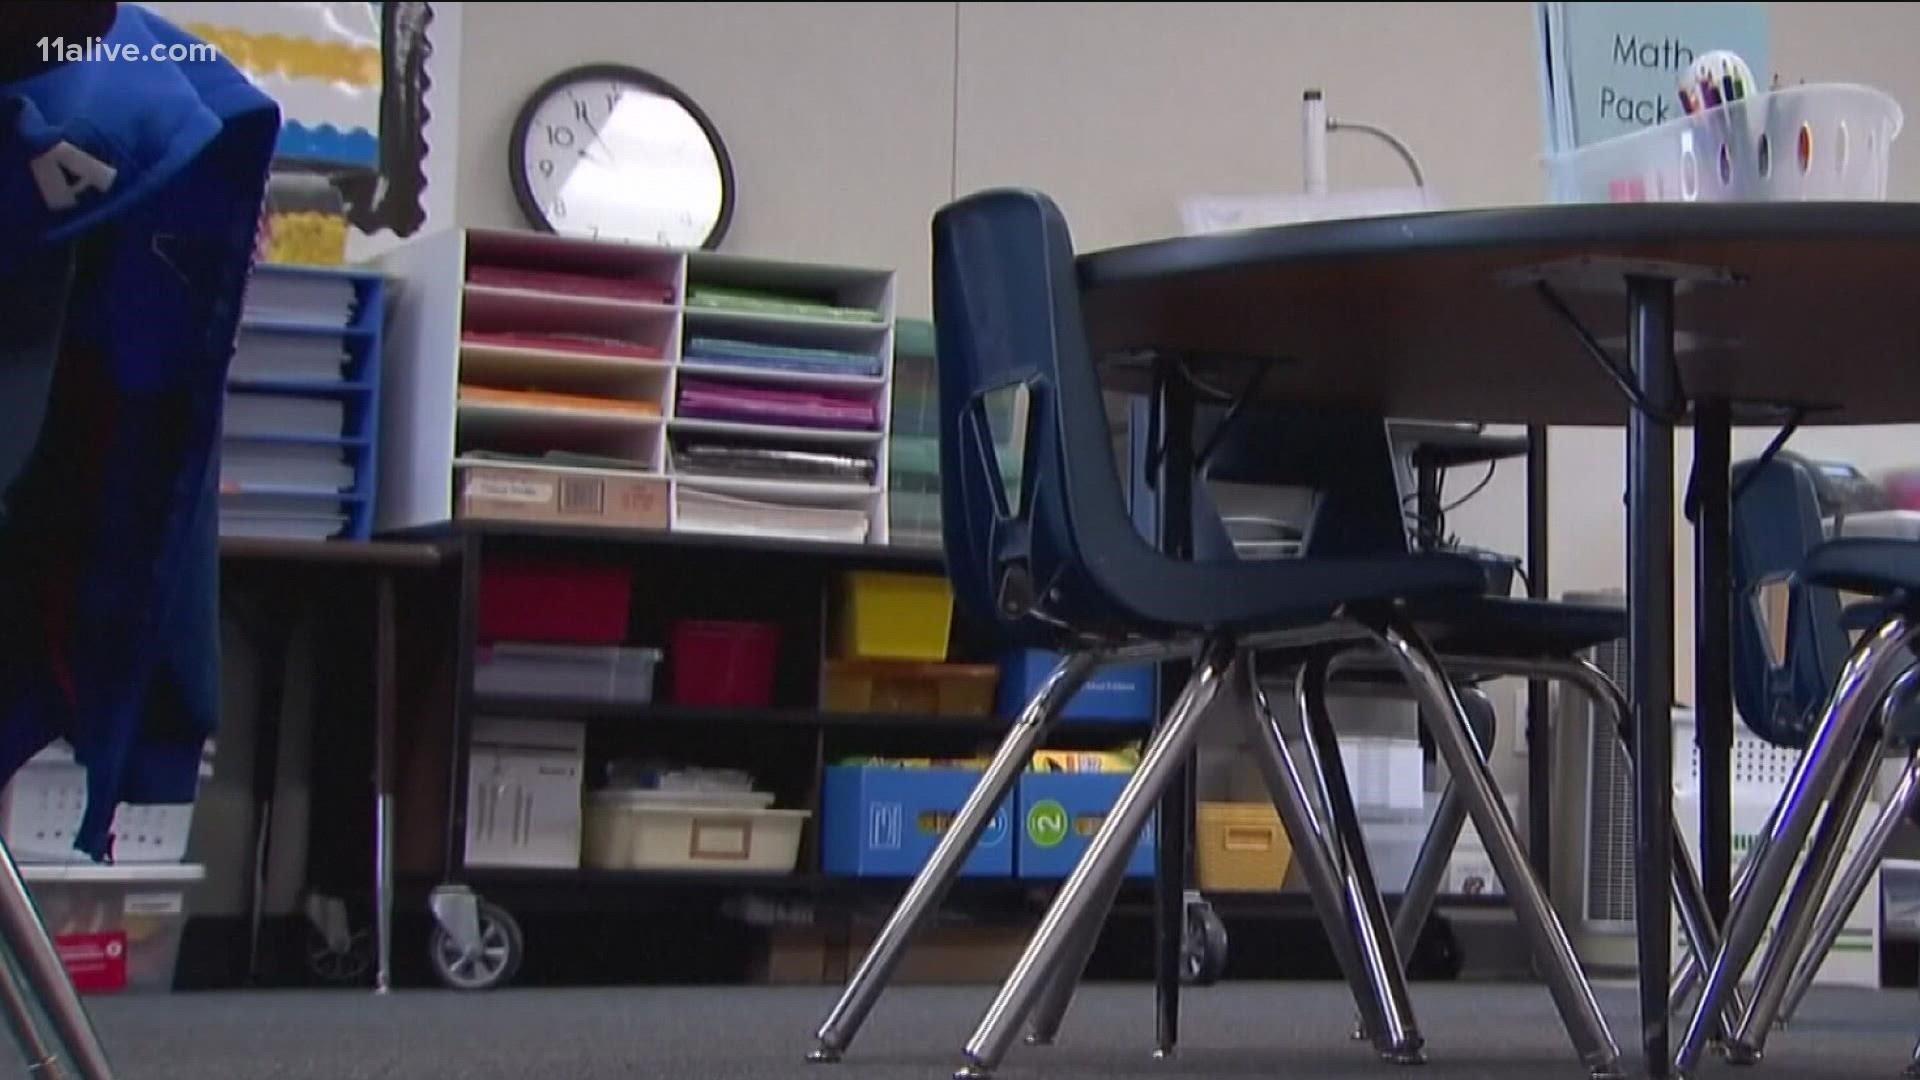 A Clayton County 4th grade teacher, who wishes to remain anonymous, told 11Alive her students are getting sent home sick.